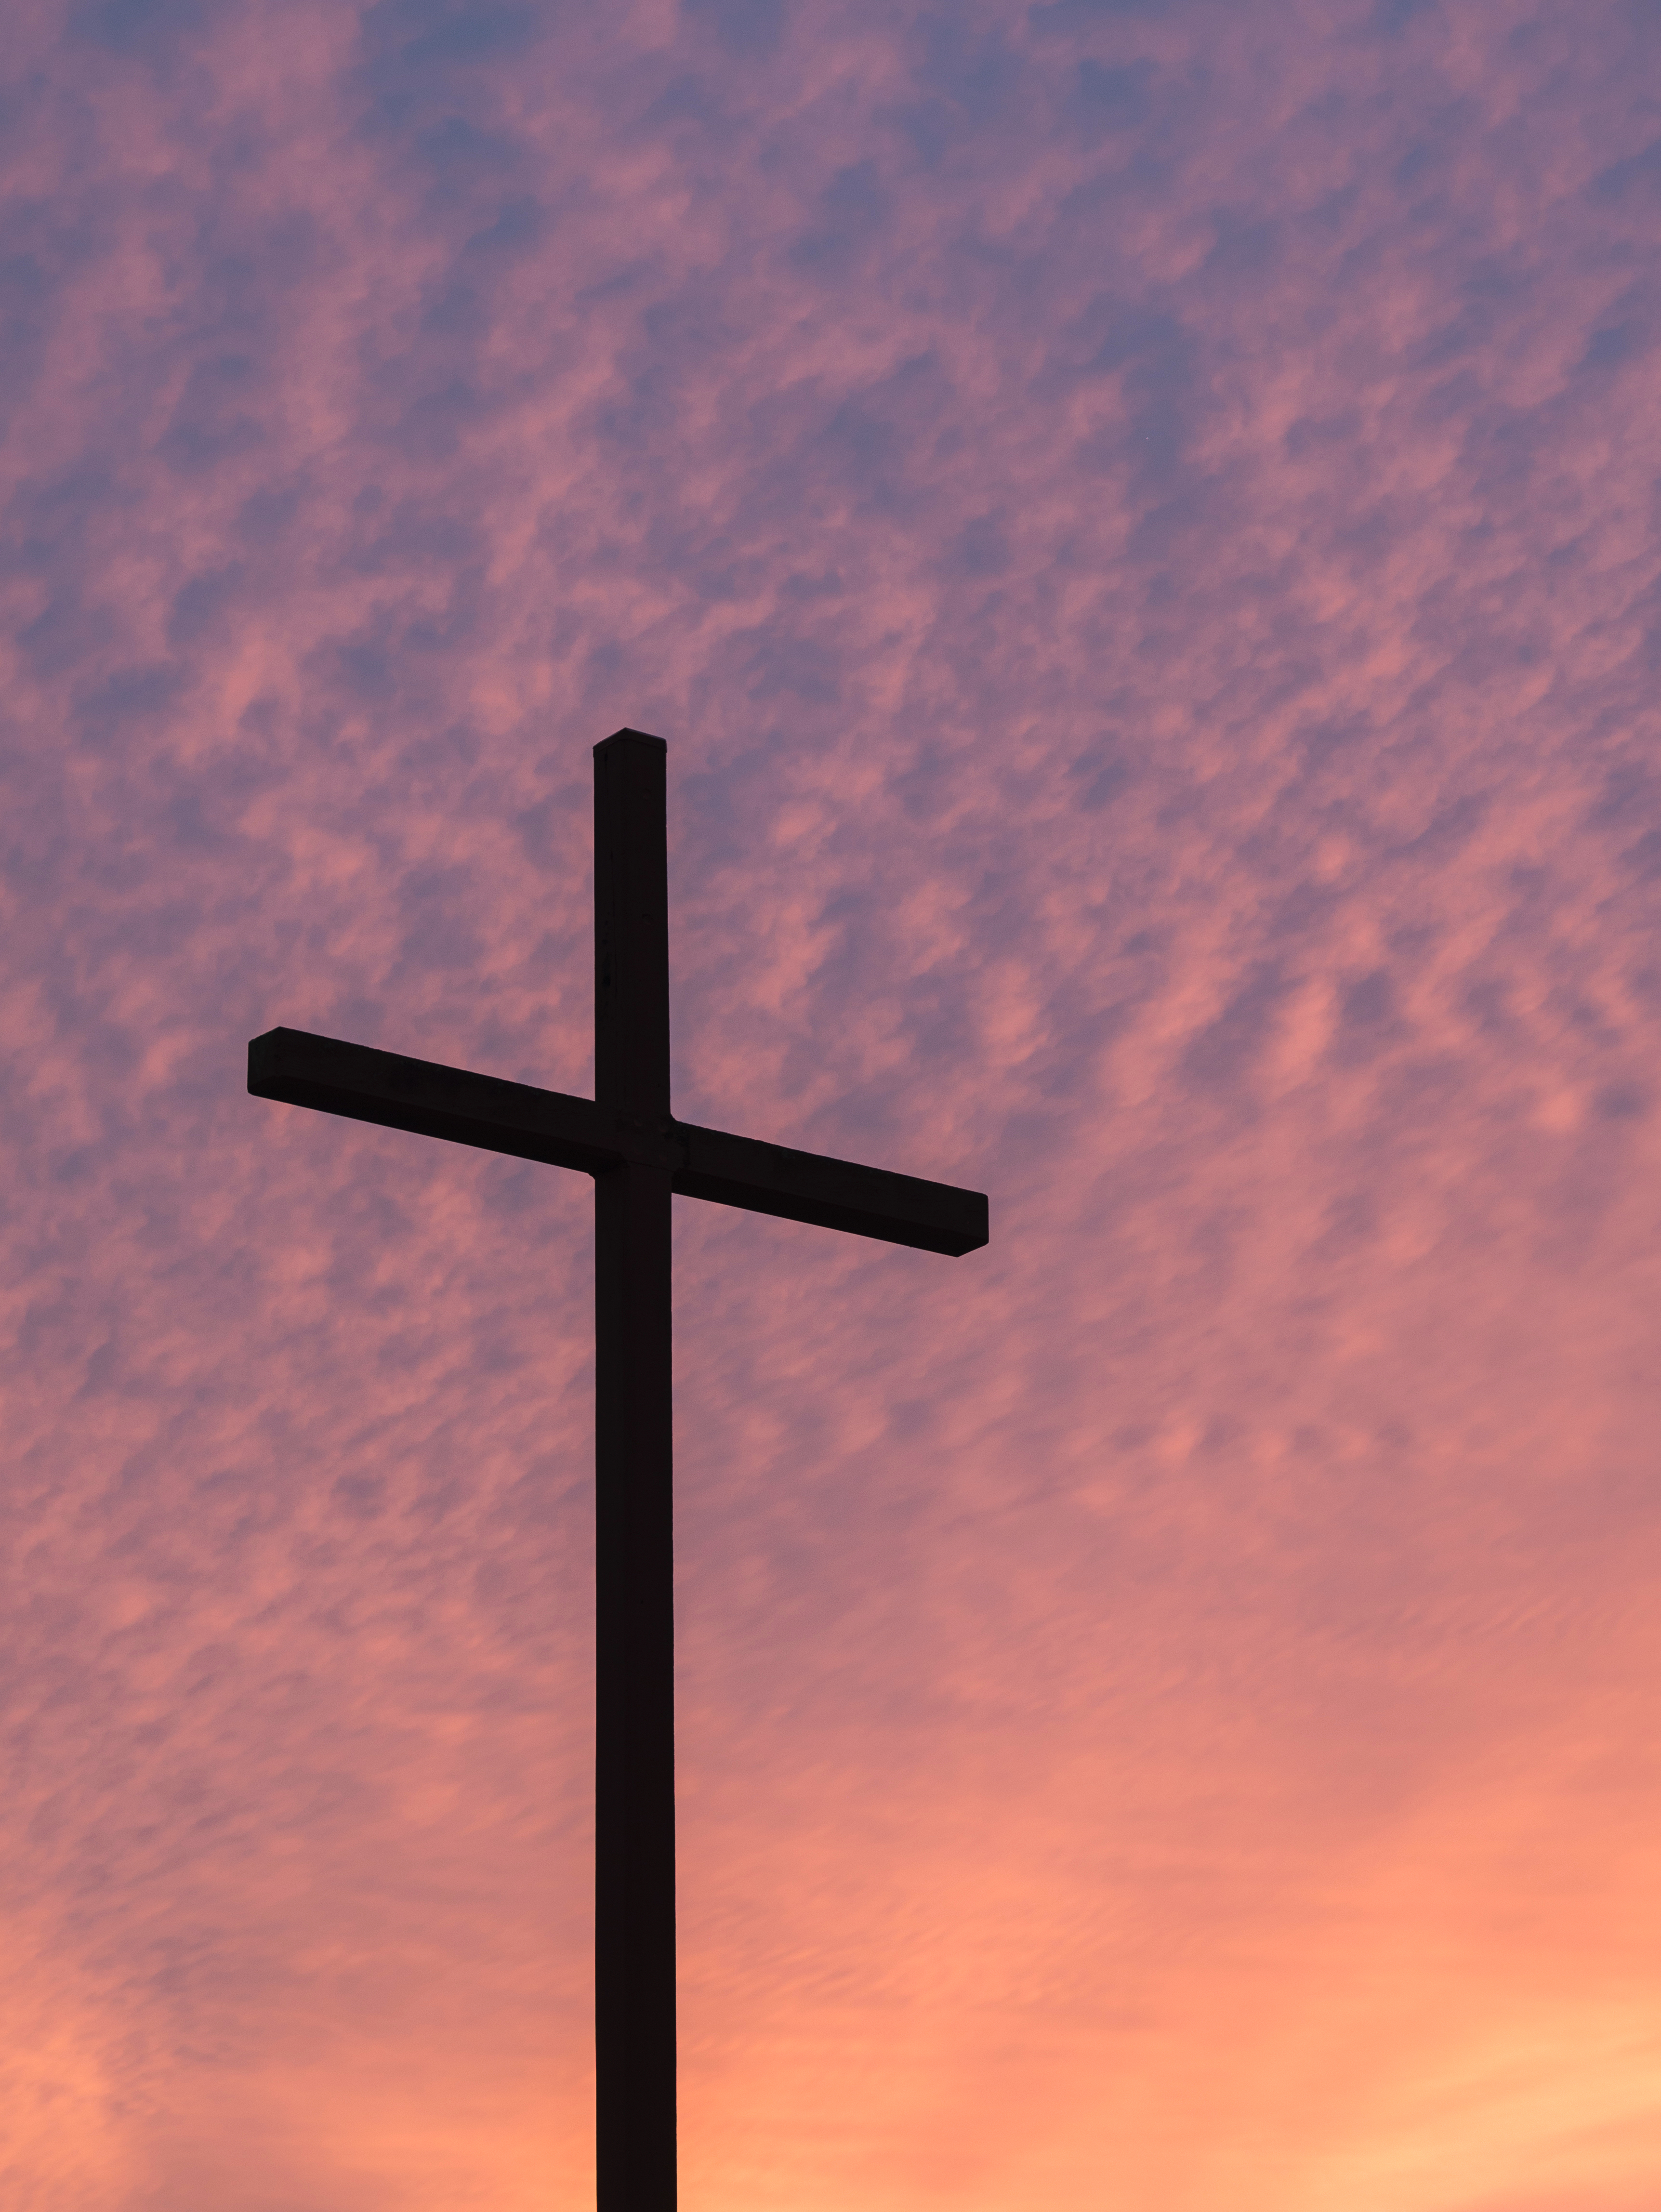 The Crucifixion: Why did Jesus die on the cross?HopeStreamRadio